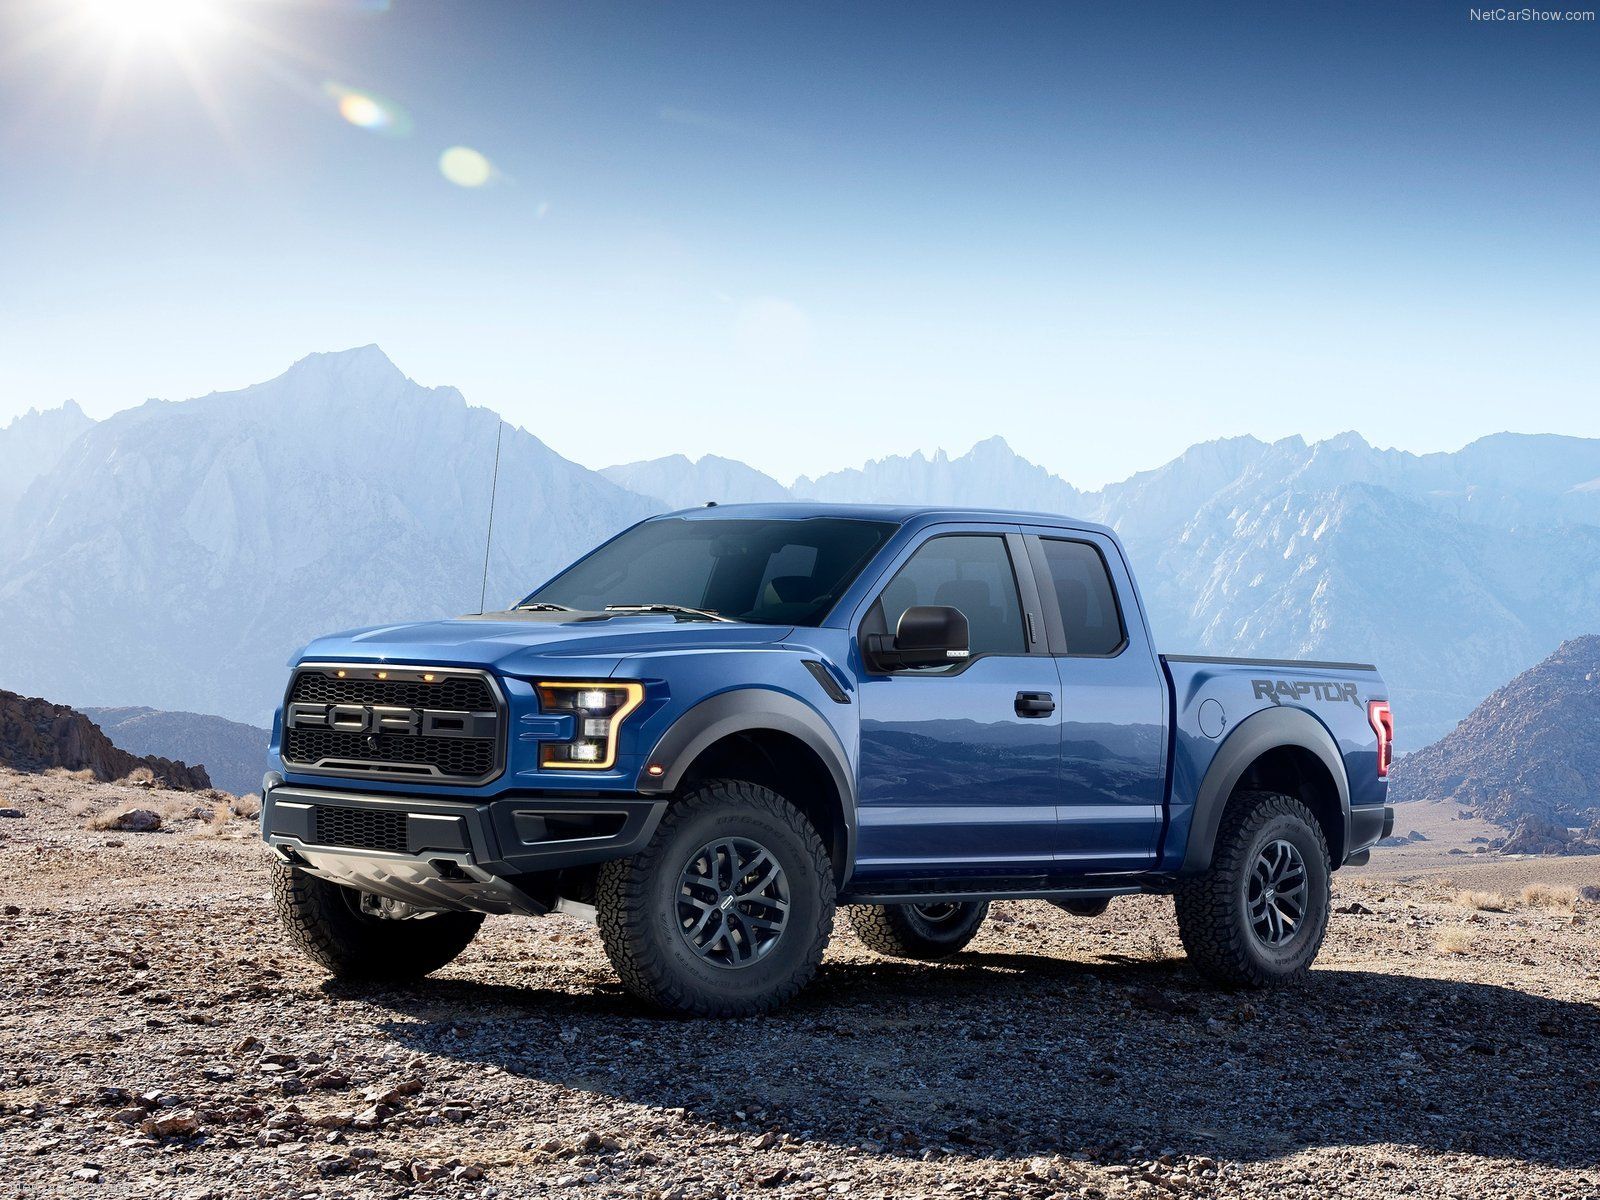 Hot Blue Color Ford Pickup Truck On Mountain 
width - 2017 Ford Raptor Graphics Package - HD Wallpaper 